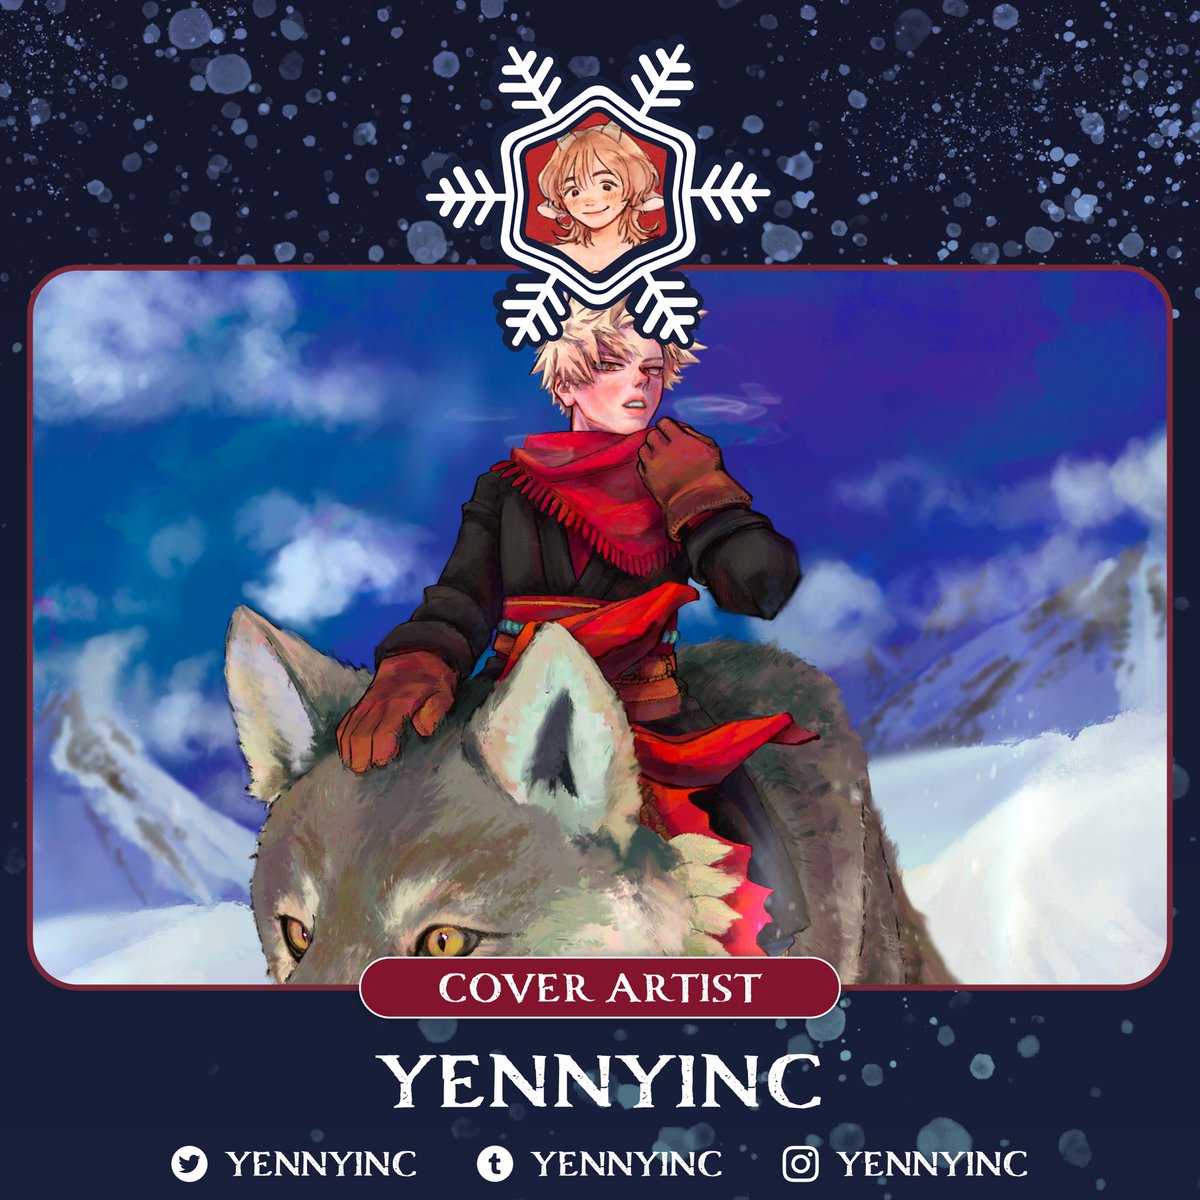 ❄️It's spotlight time! And who would we begin with but our lovely cover artist, @yennyinc? 'Yello I’m Yenny I love to draw red noses and cheeks from the cold. I am oh so joyous to be part of this! Thank you!'